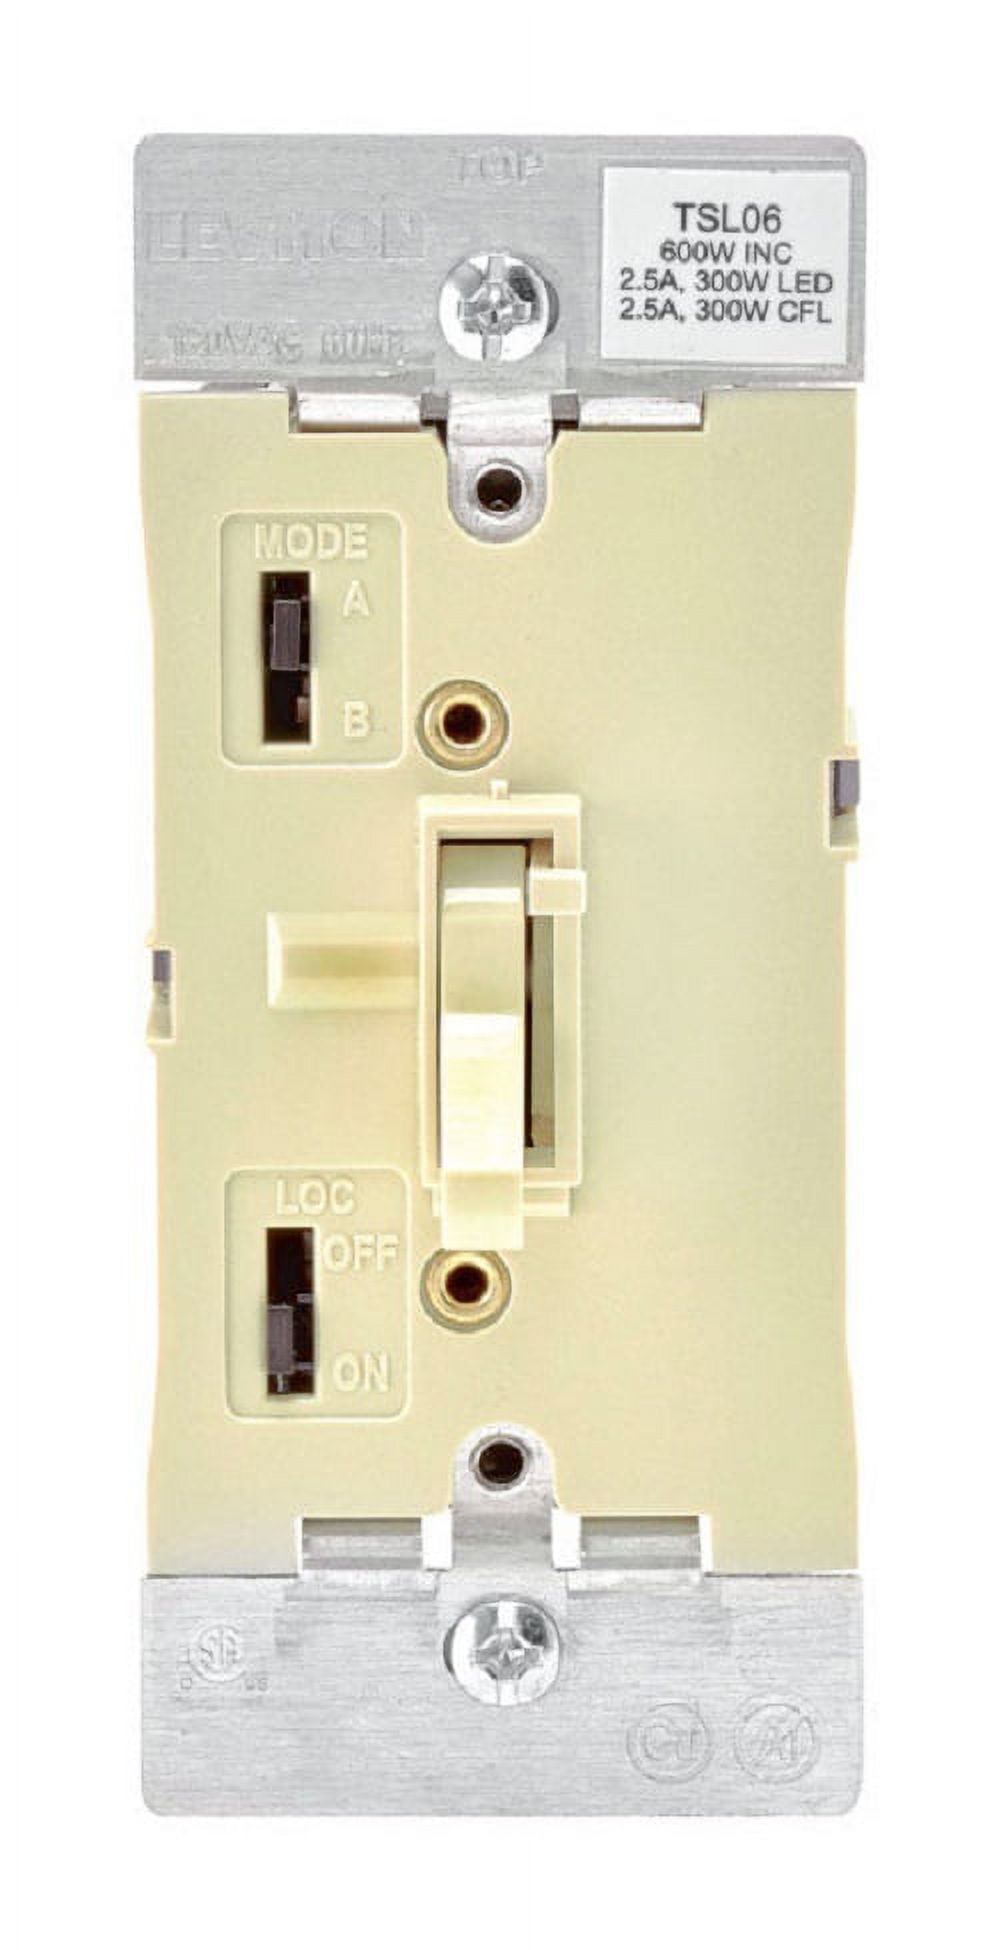 Leviton 3775335 2.5 Amp 600w-120vac Incandescent Toggle Dimmer Switch Ivory